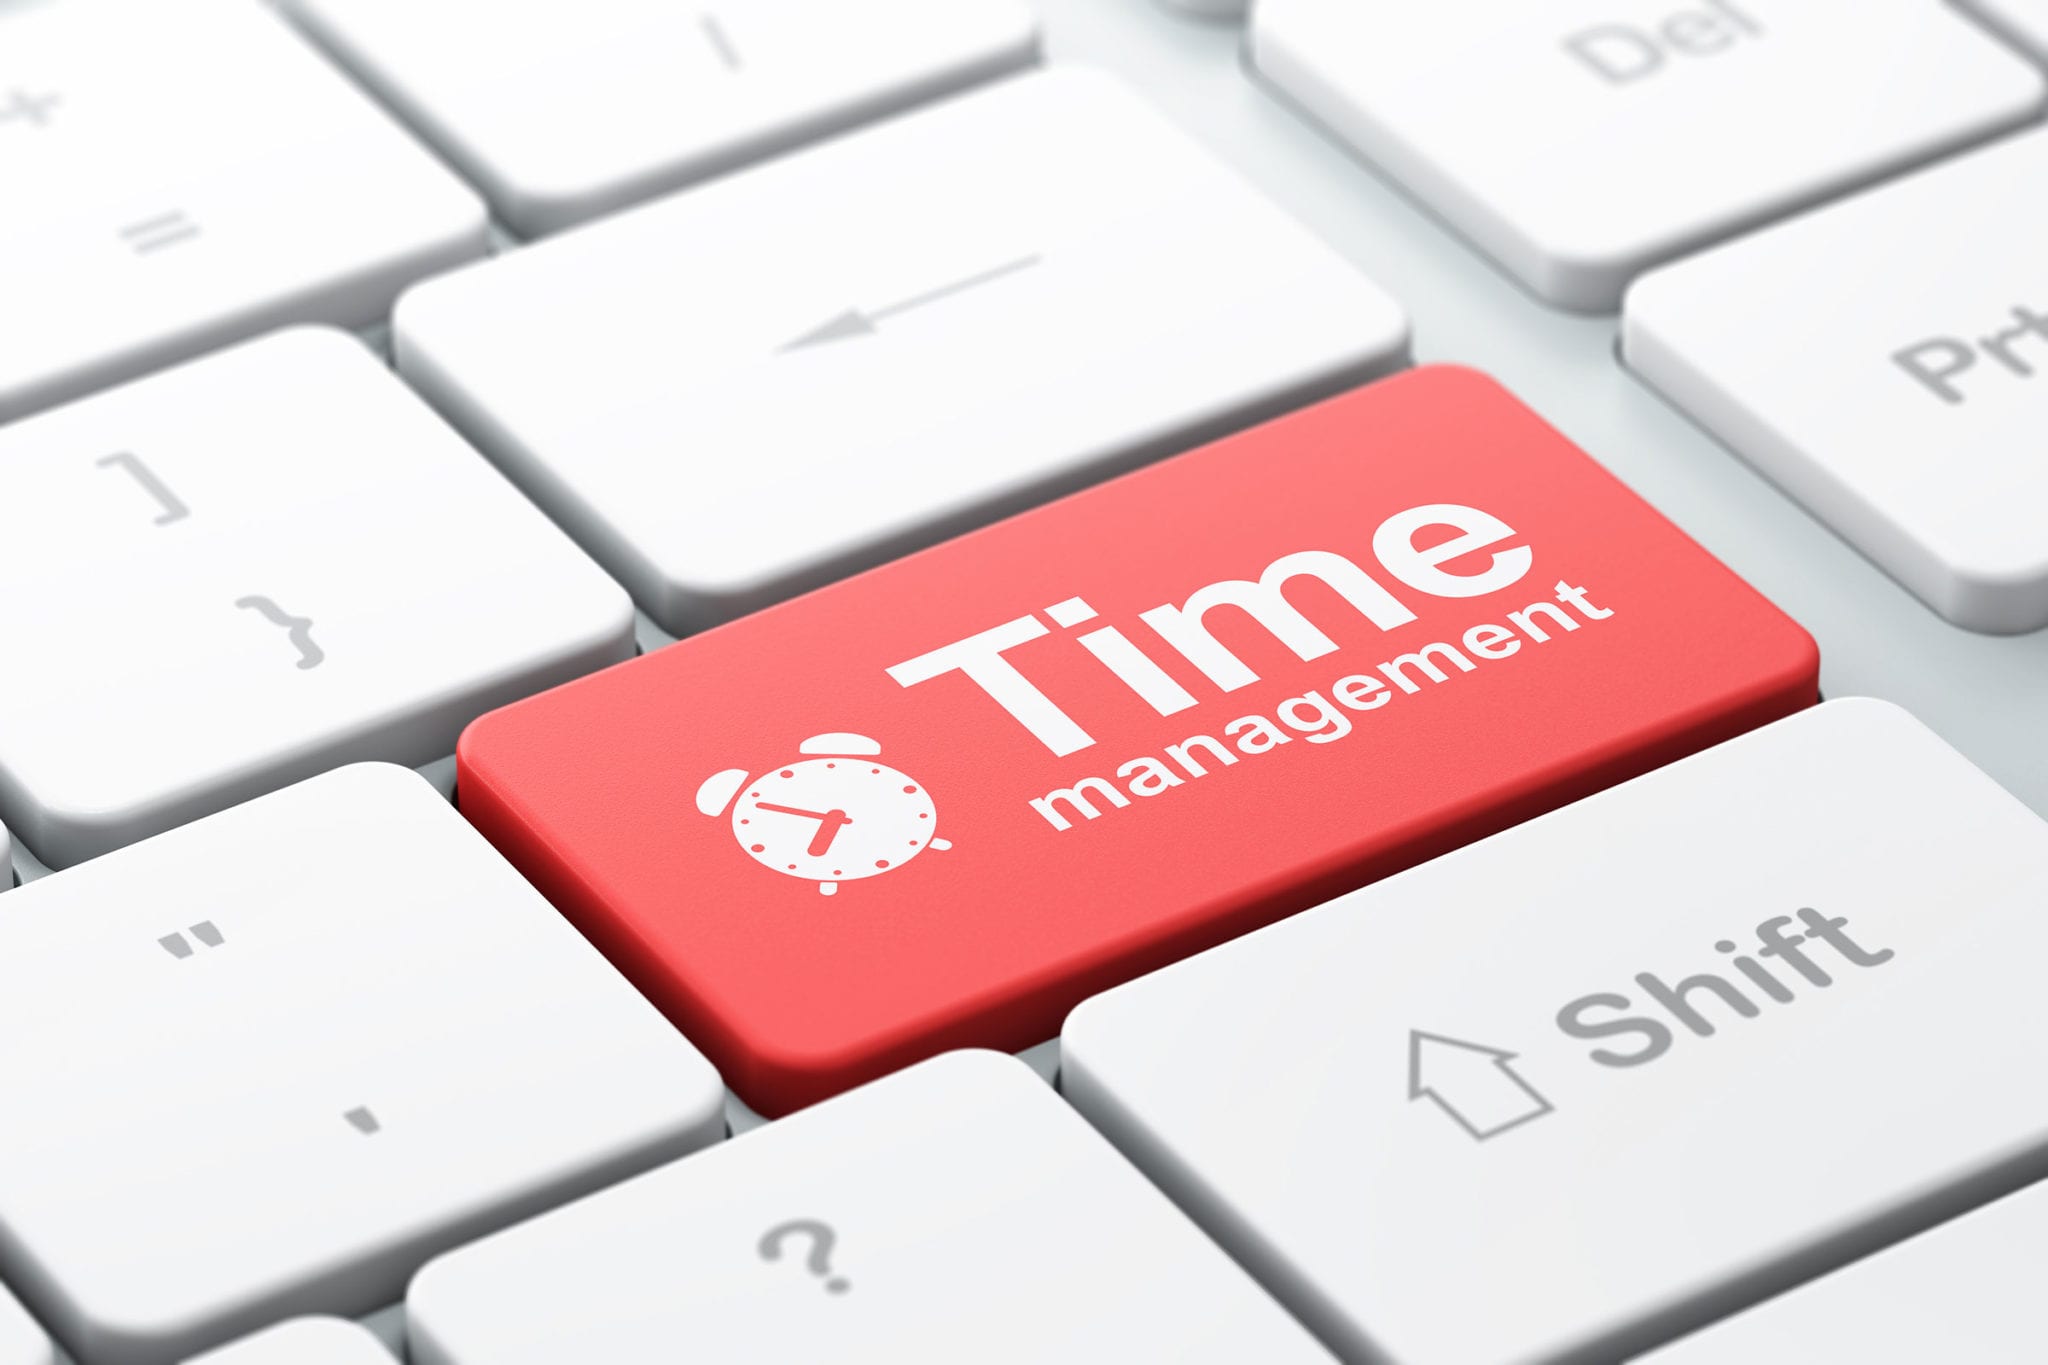 Is Trello Really Effective Time Management Tool